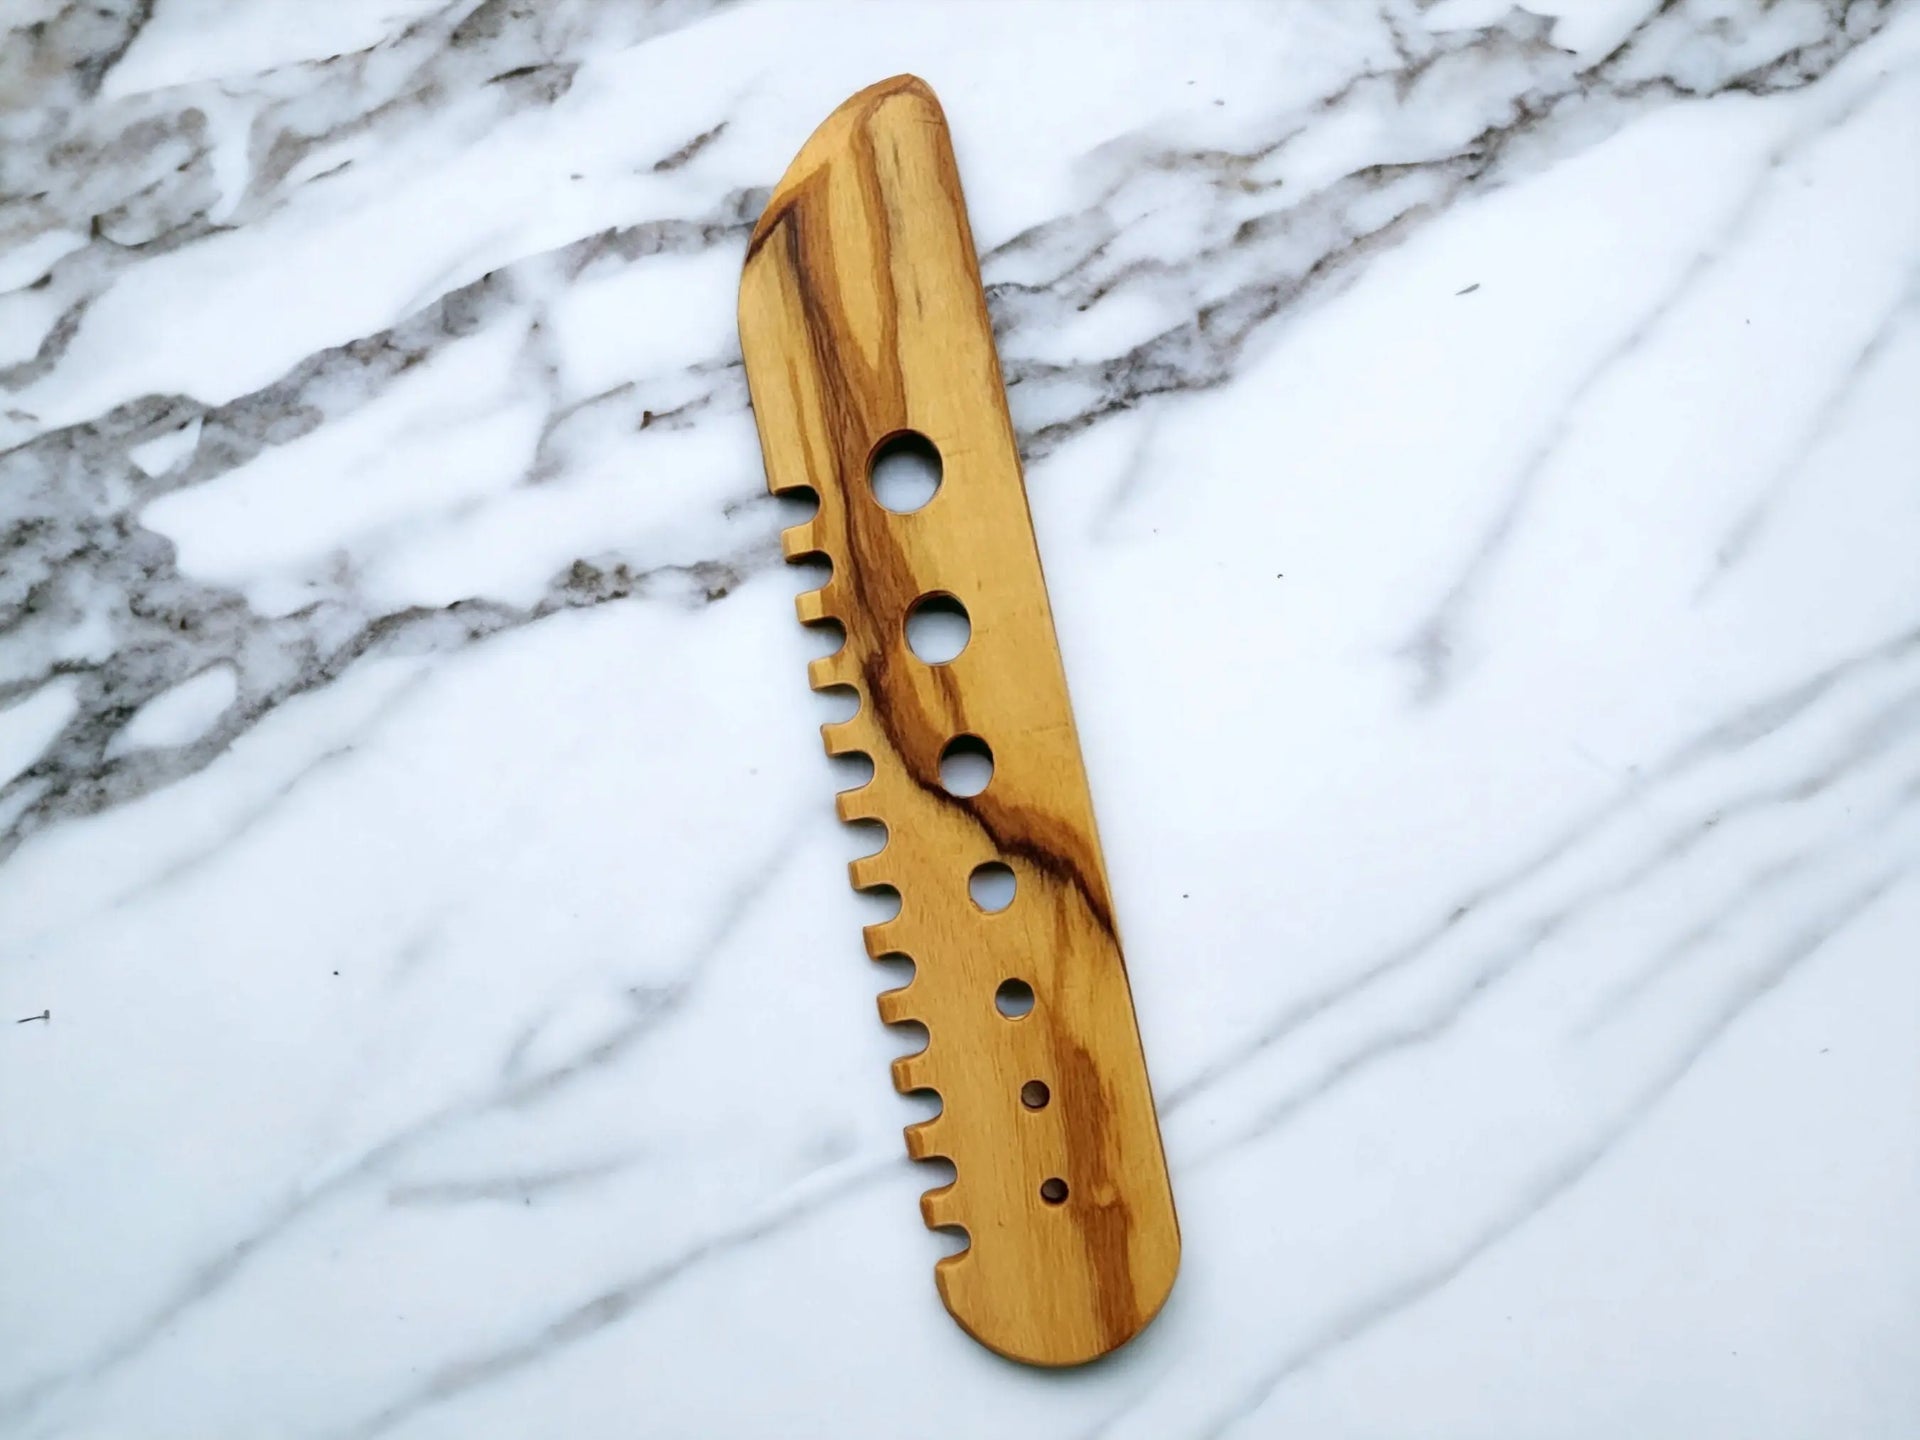 Herb Stripper Handmade From Olive Wood/ Chef Gifts/ Kitchen Gifts